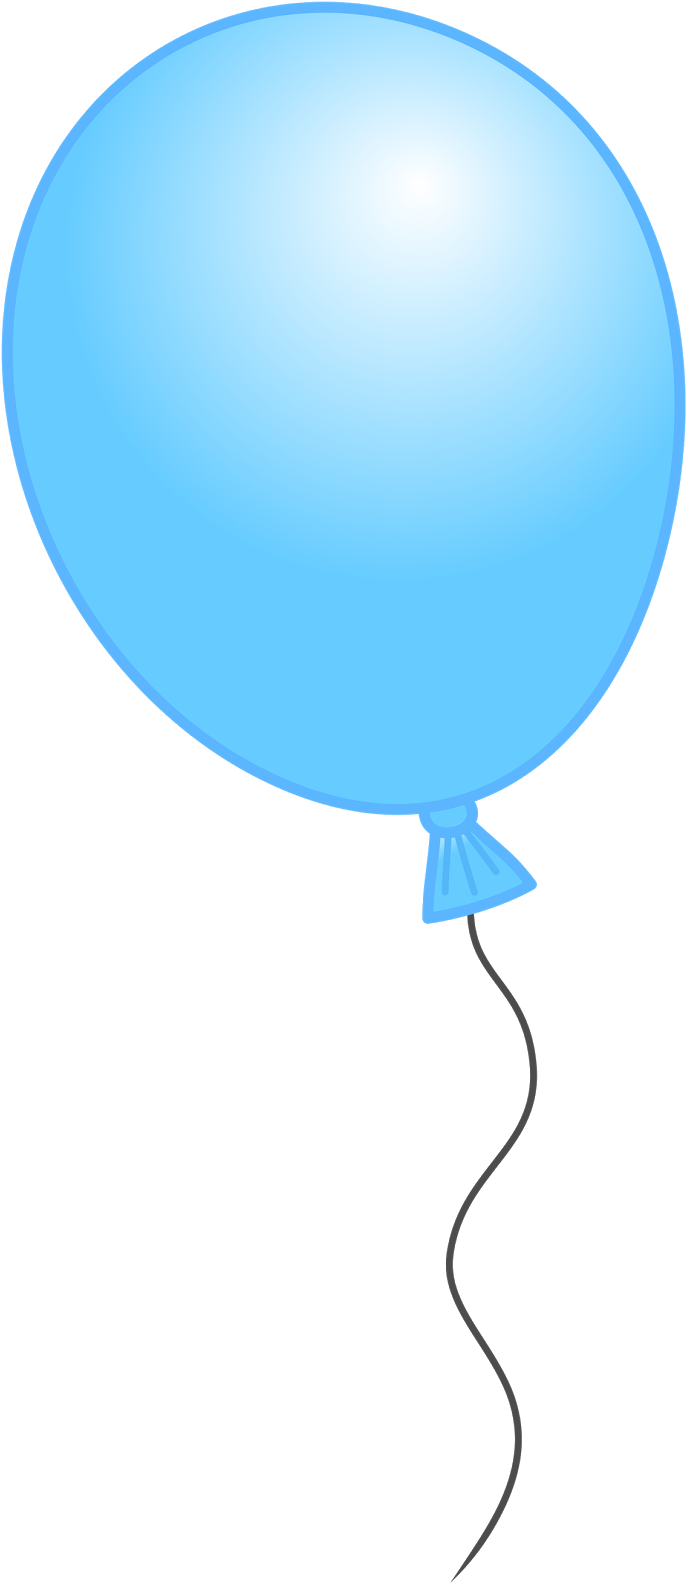 Light Blue Clipart Balloon Pencil And In Color Light - Light Blue Balloon Clipart (719x1600)